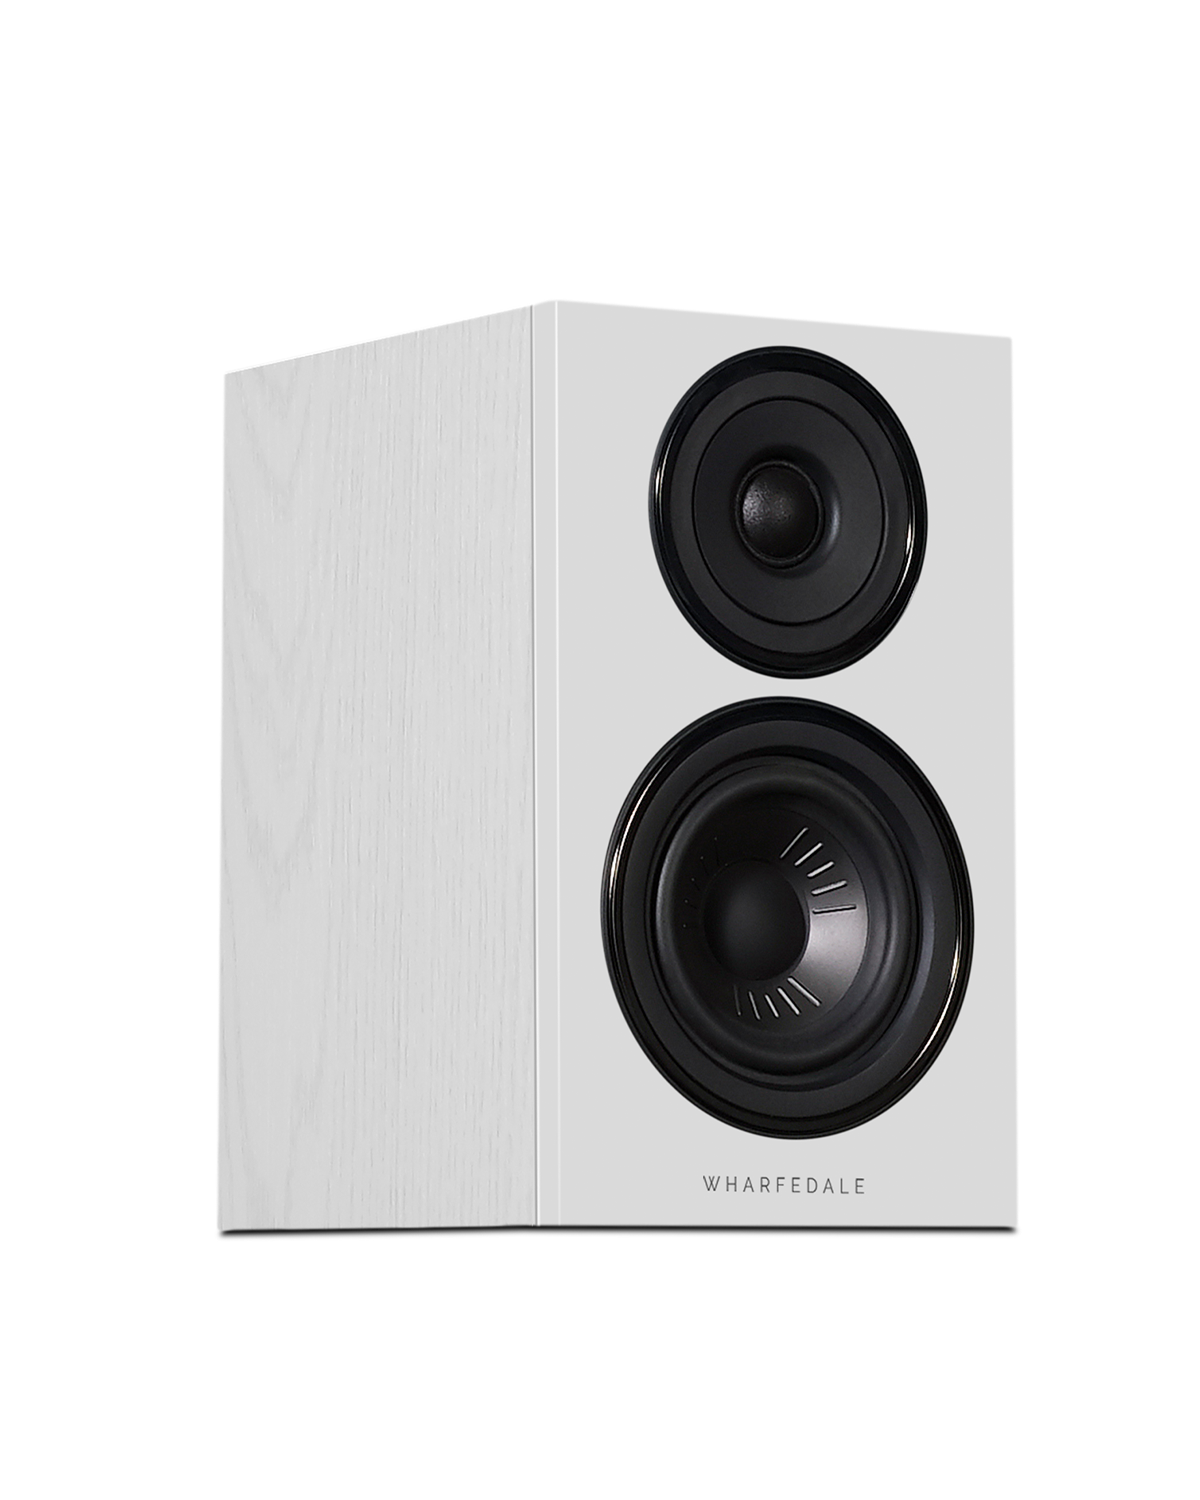 Still compact but with increased cabinet volume and driver size for even more potency, the Wharfedale DIAMOND 12.2 offers a little more from a traditional standmount (or bookshelf) speaker format and embodies the history and performance values of the Wharfedale DIAMOND series.